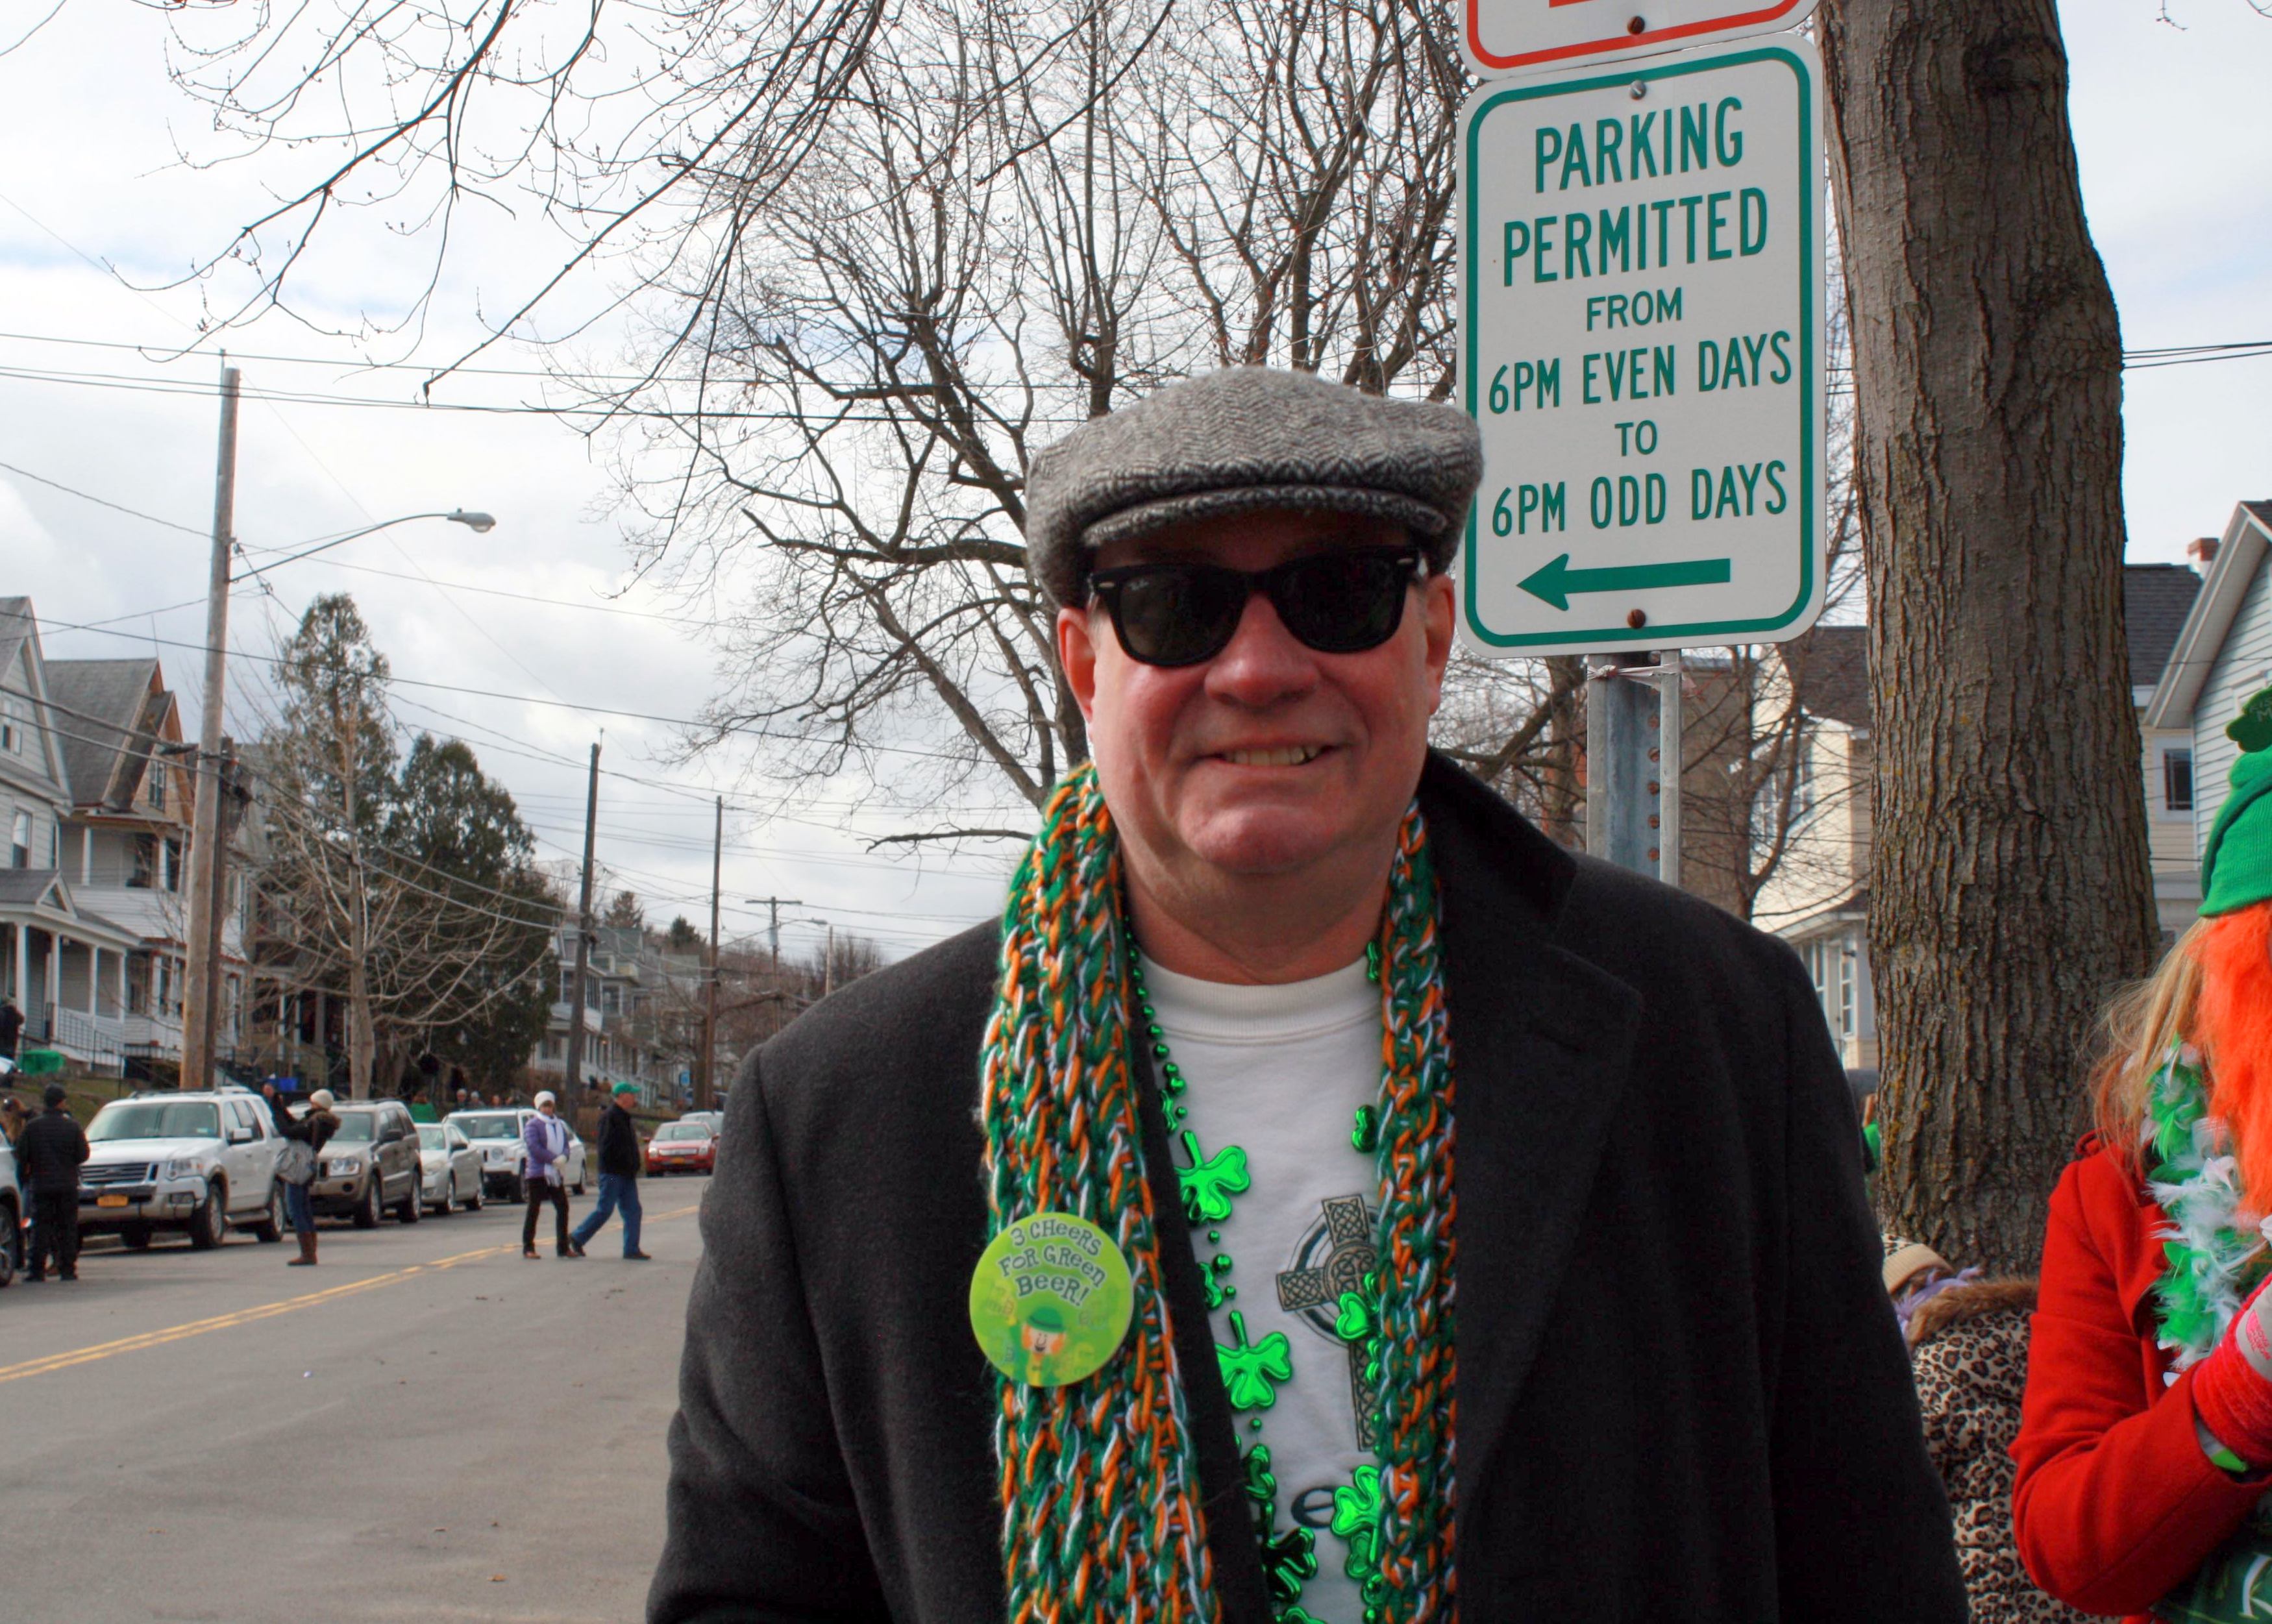 John Buckley dresses up every year to attend Green Beer Sunday in Tipp Hill, where he grew up. This year, he came with his wife Lynn, whose homemade kilt took 22 hours per pleat to construct. 